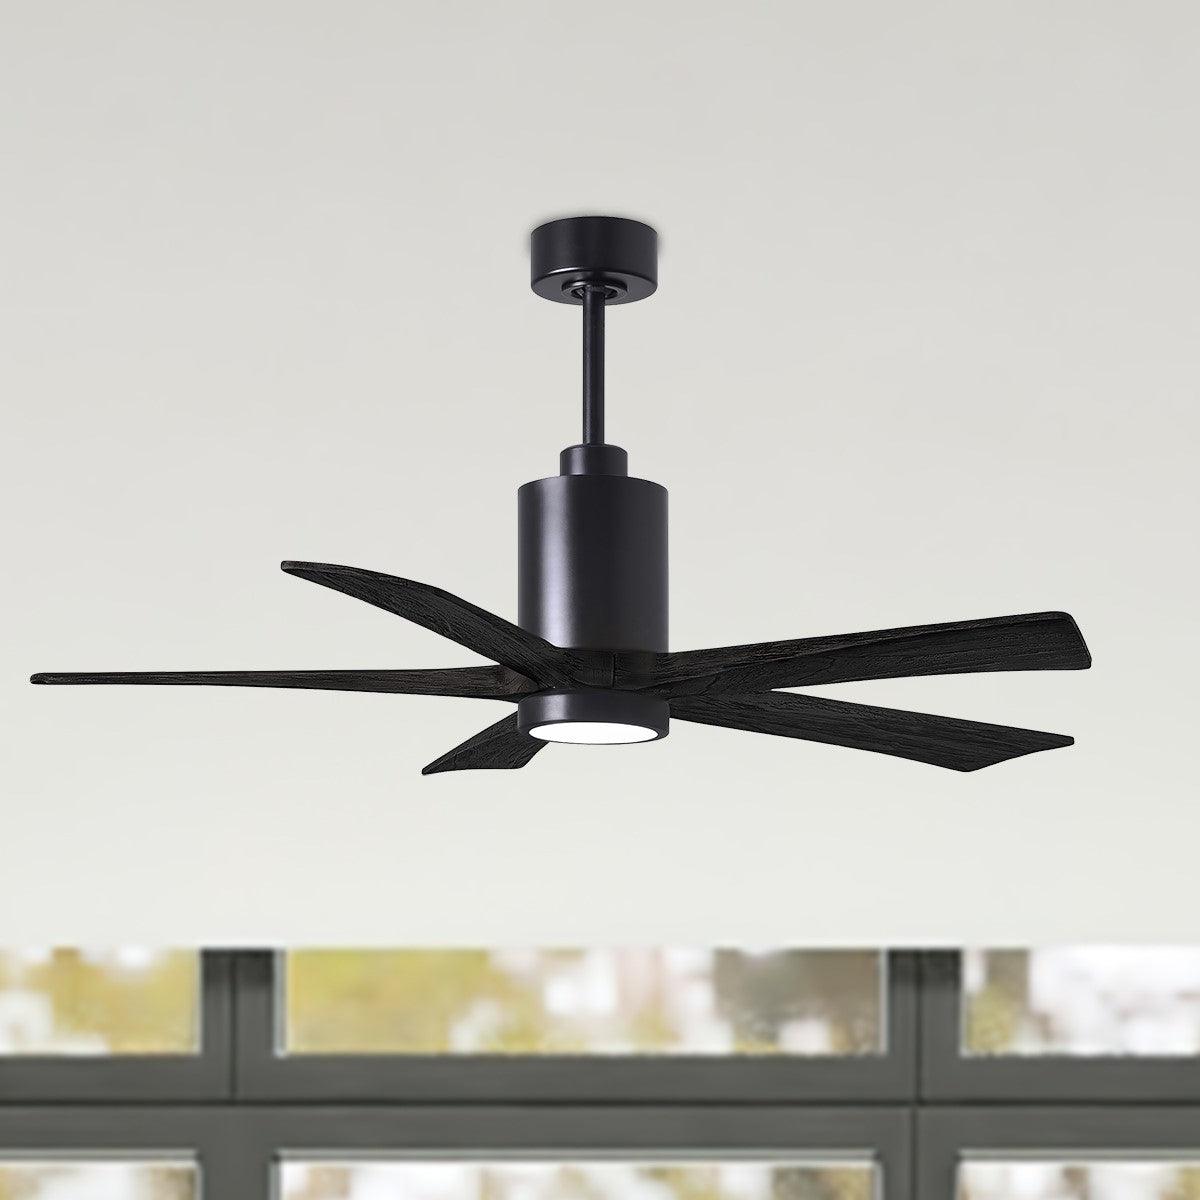 Matthews Fan Company Patricia 52 Inch 5 Blades Modern Outdoor Ceiling With Light Wall And Remote Control Included Bees Lighting